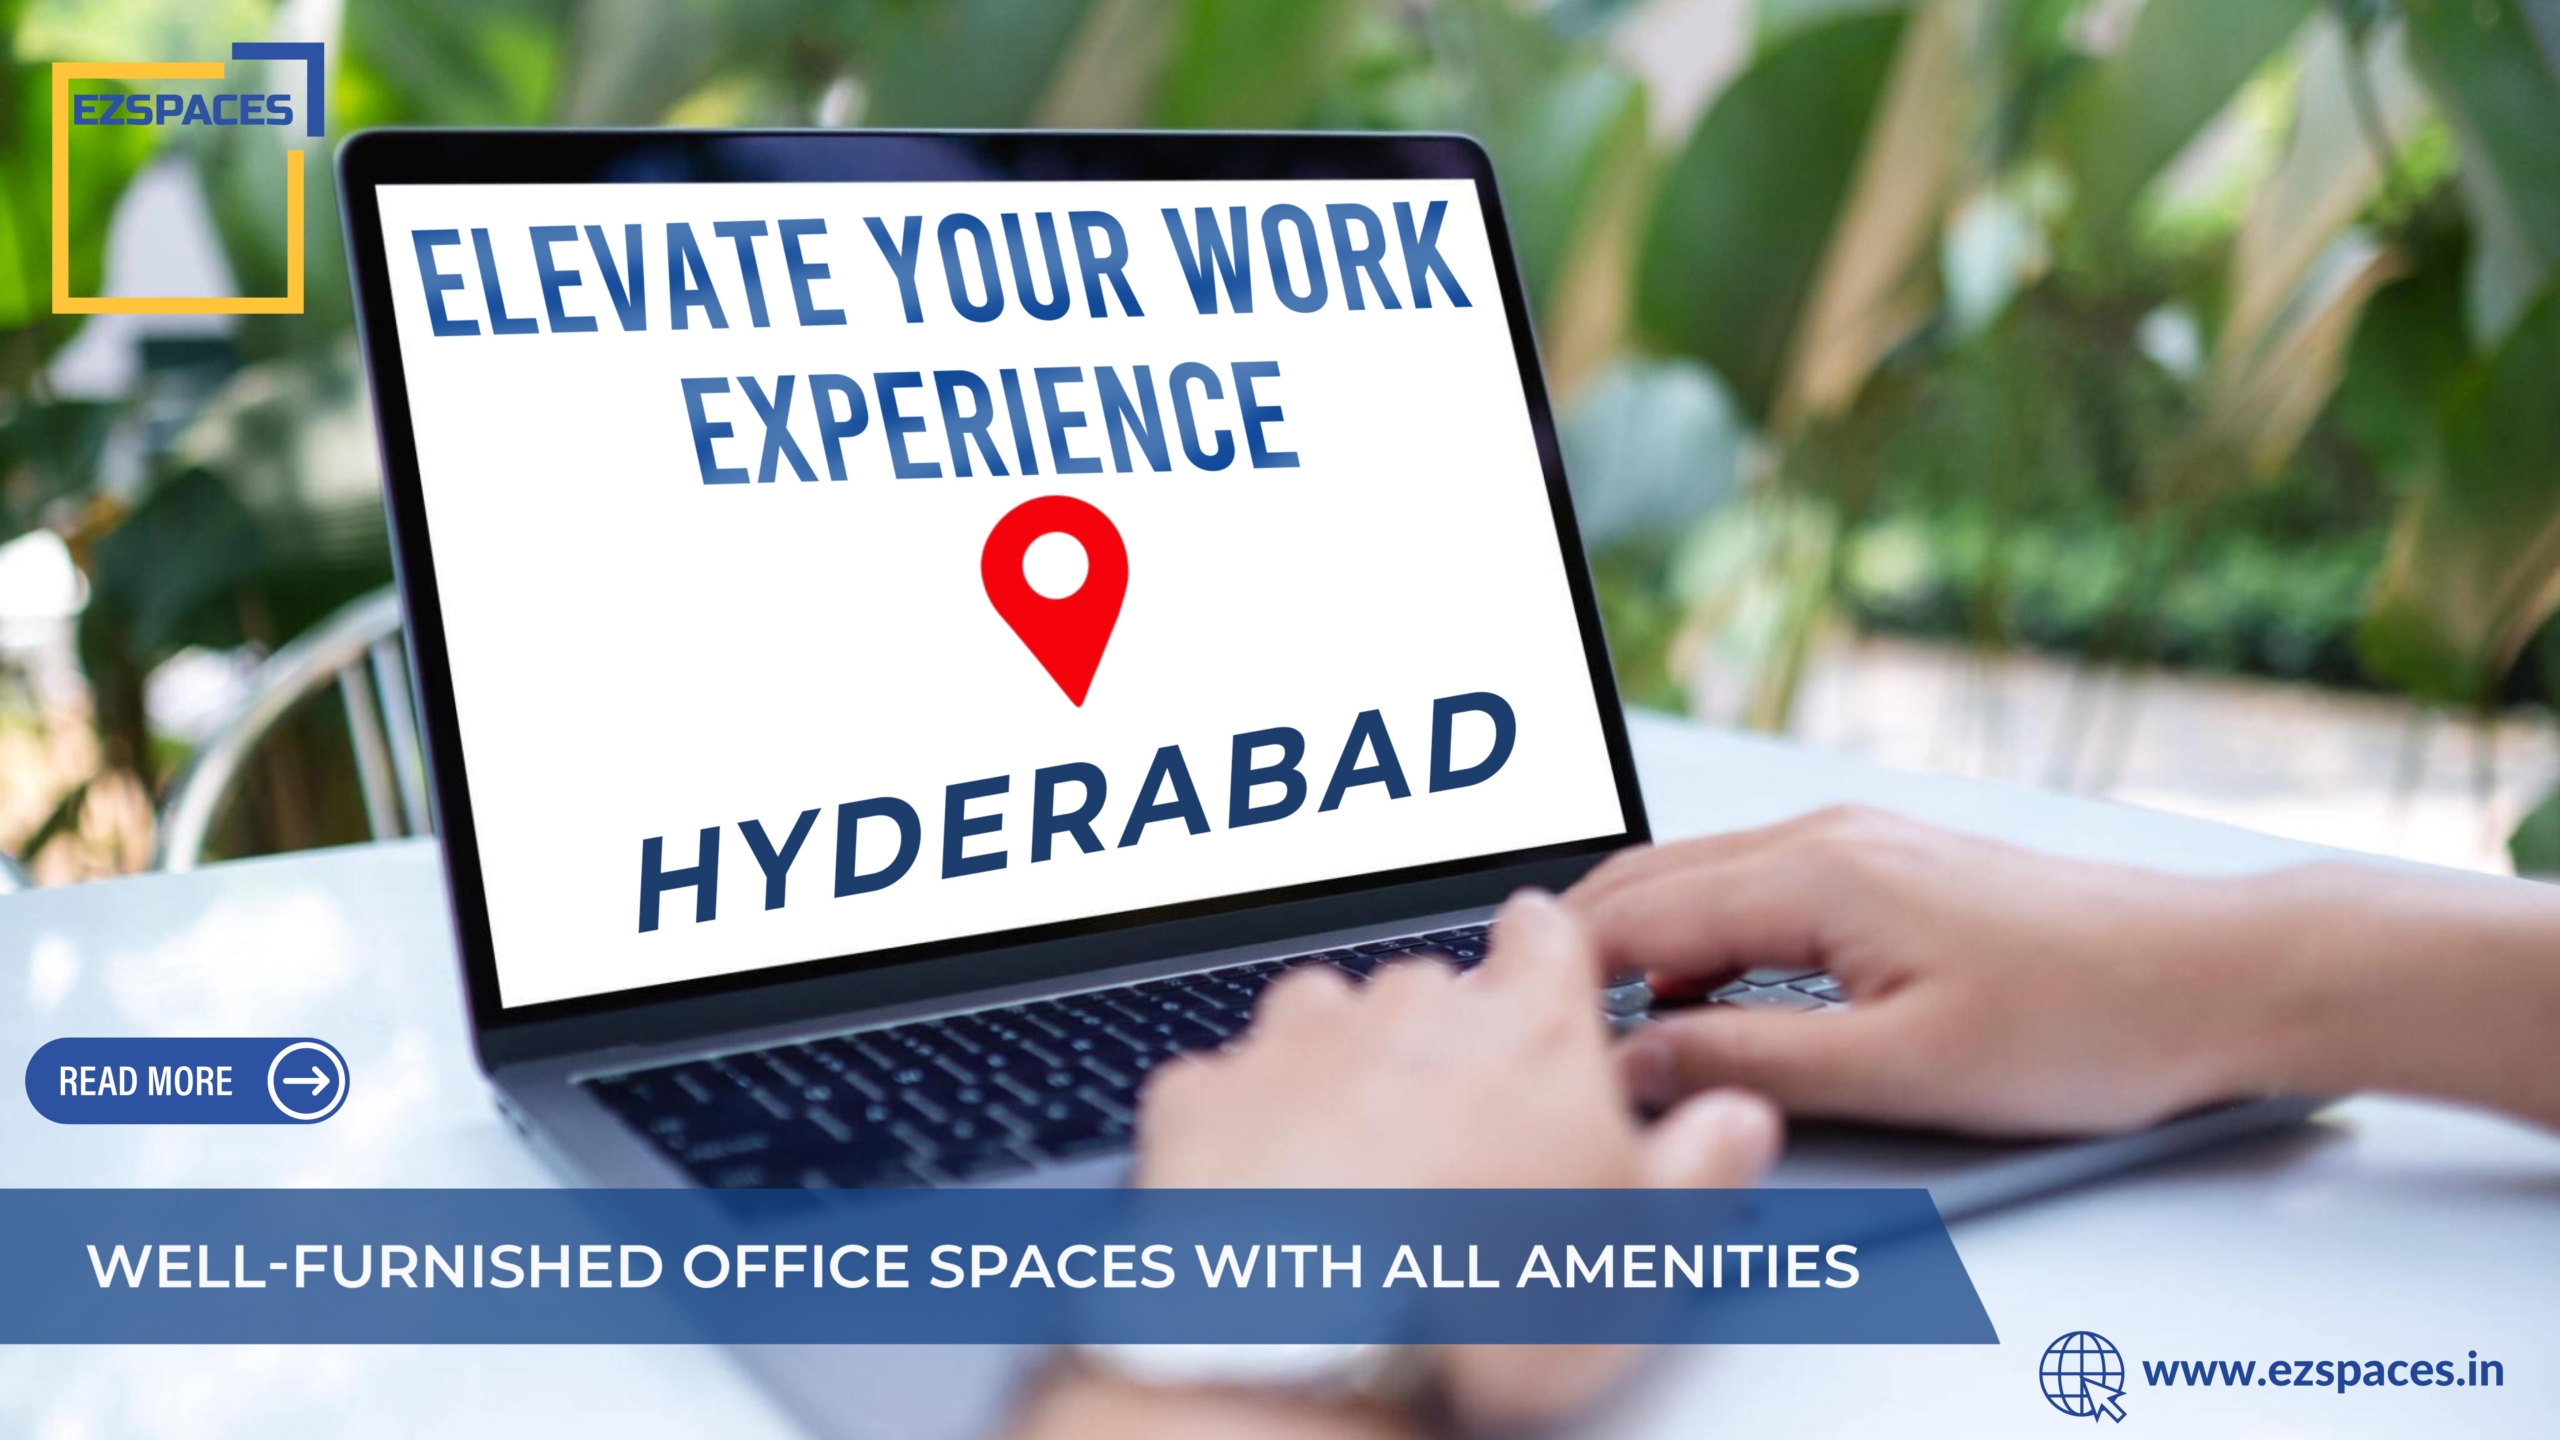 Elevate Your Work Experience Well-Furnished Office Spaces in Hyderabad with All Amenities